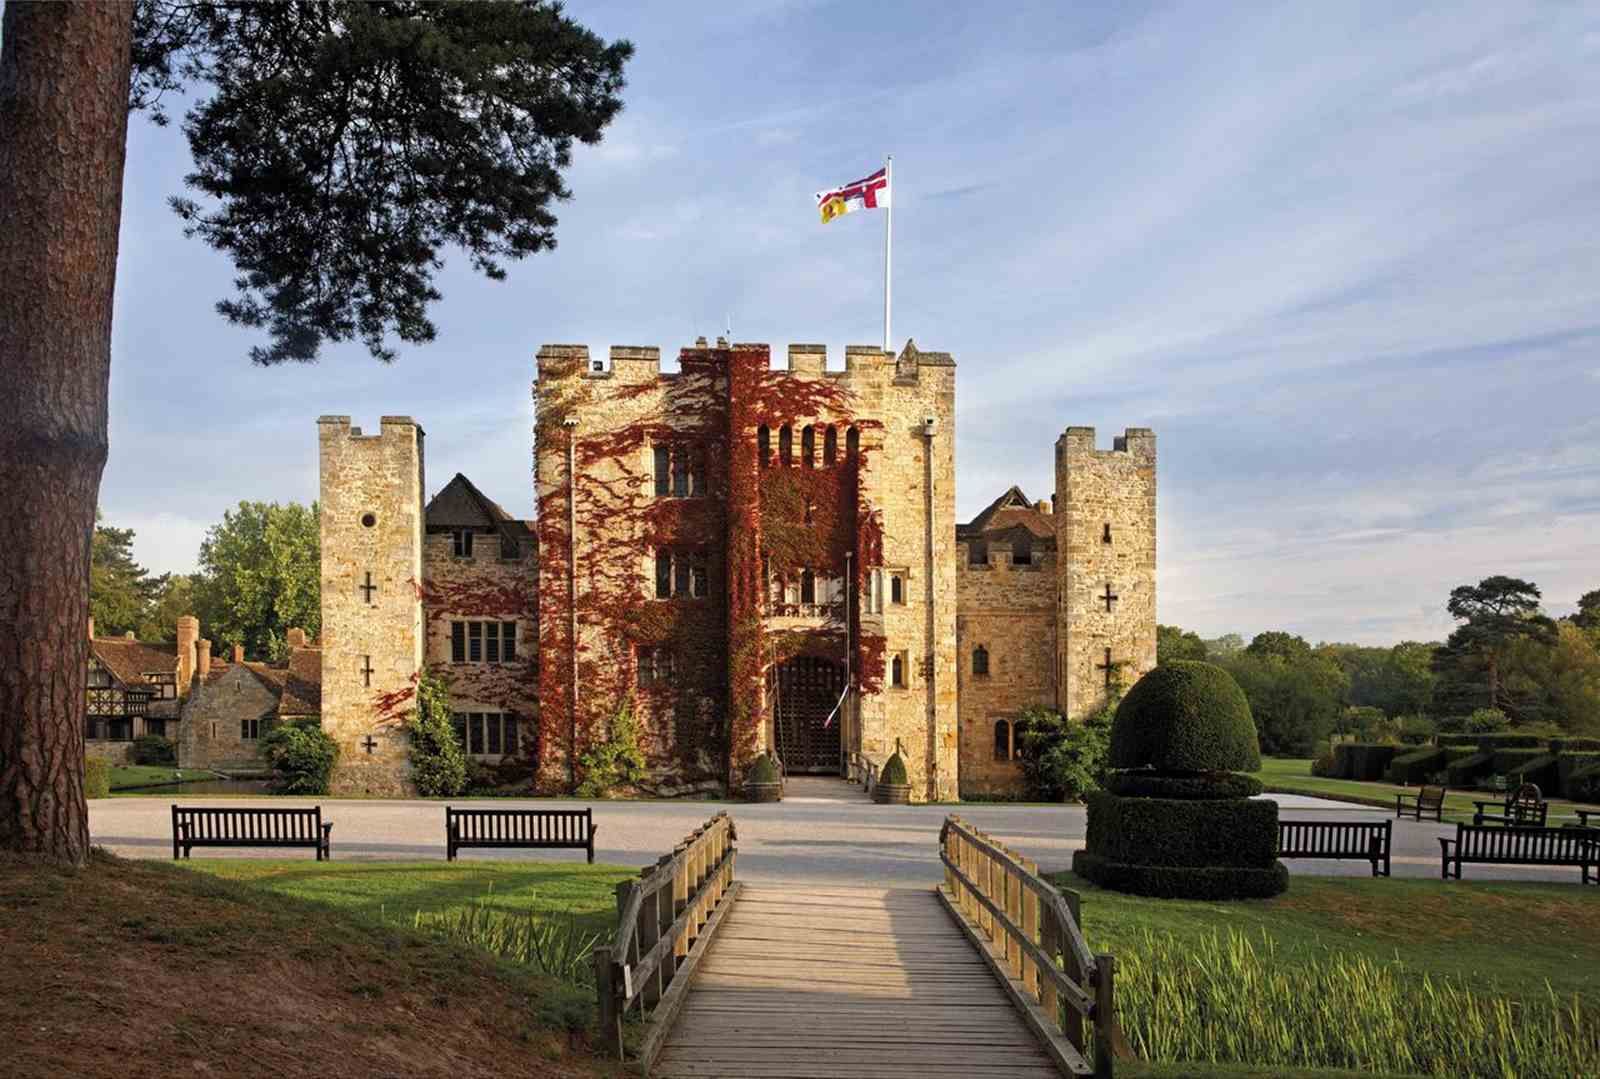 Image of an English castle.